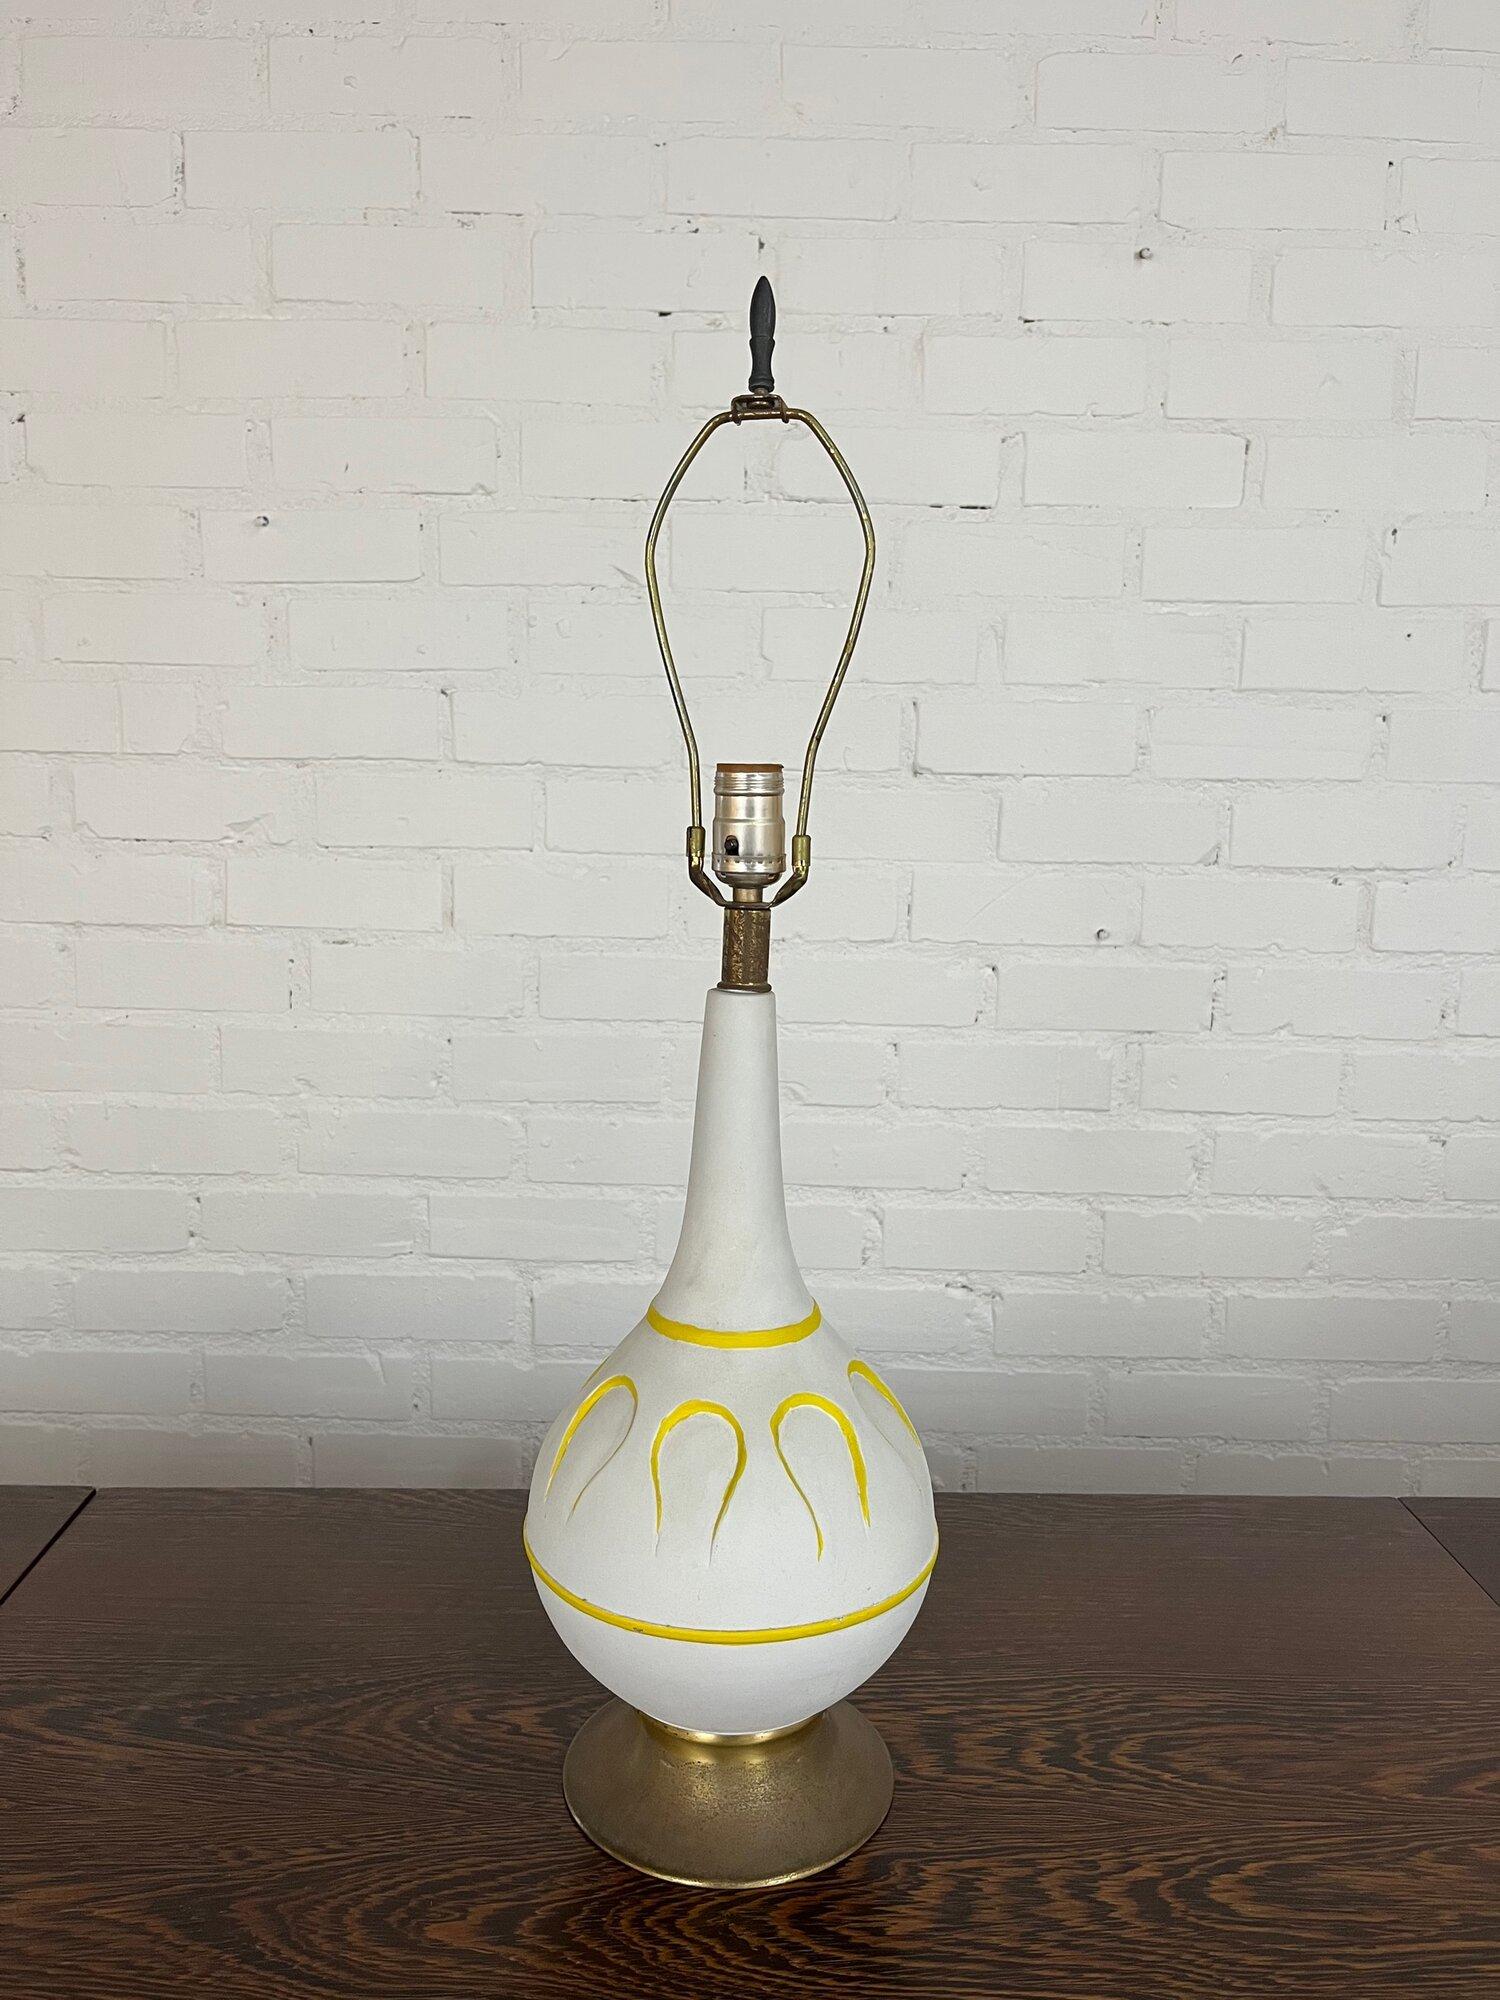 Measures: W7.5 D7.5 H29

Vintage table lamp with matte white finish accented by yellow details following the pattern on the table lamp. The brass base and details have patina. The lamp turns on and off at neck. Lamp is fully functional.